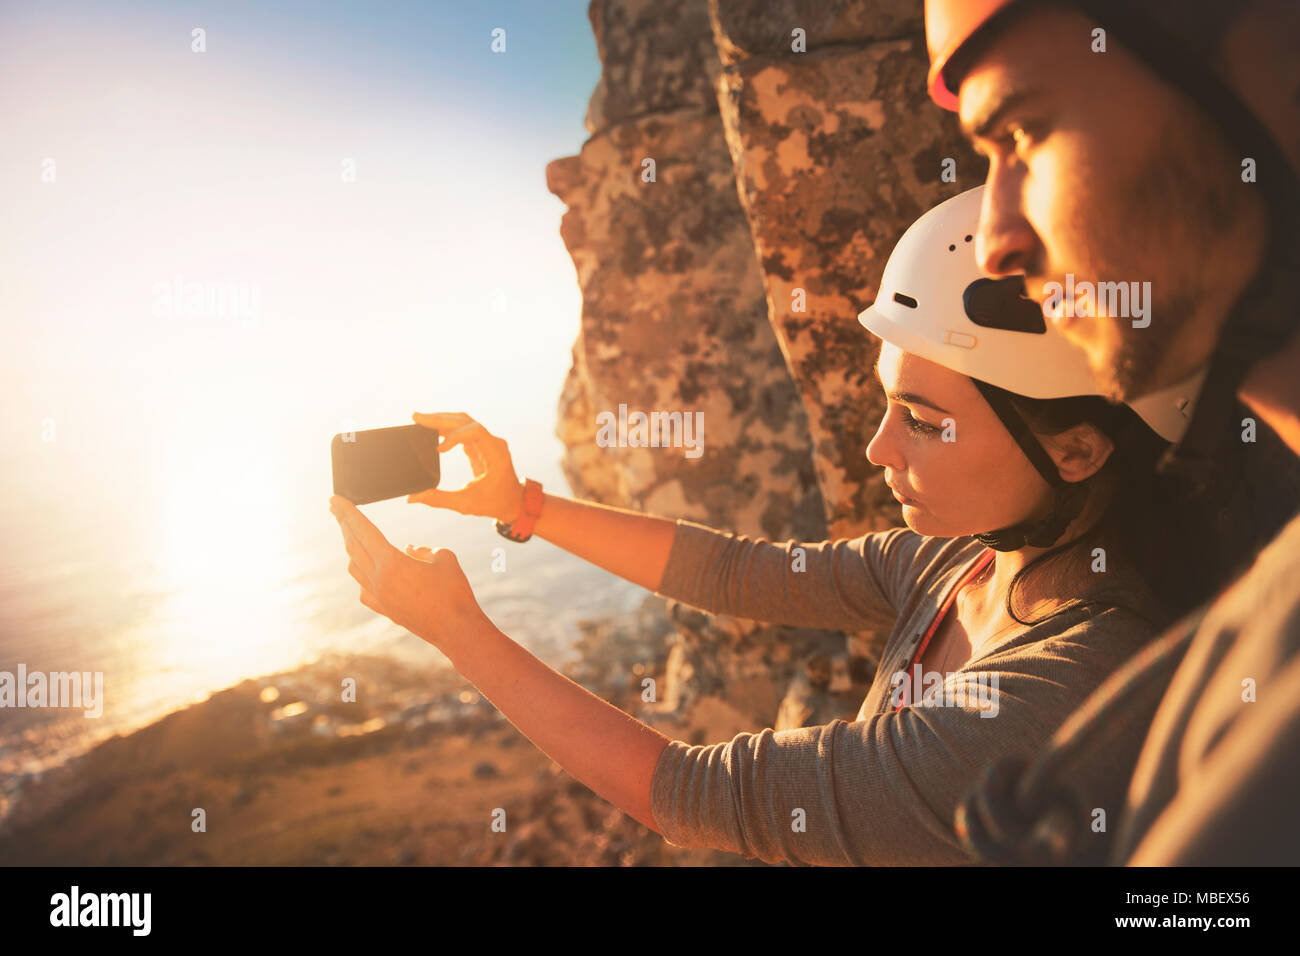 Rock climbers with camera phone photographing ocean view Stock Photo